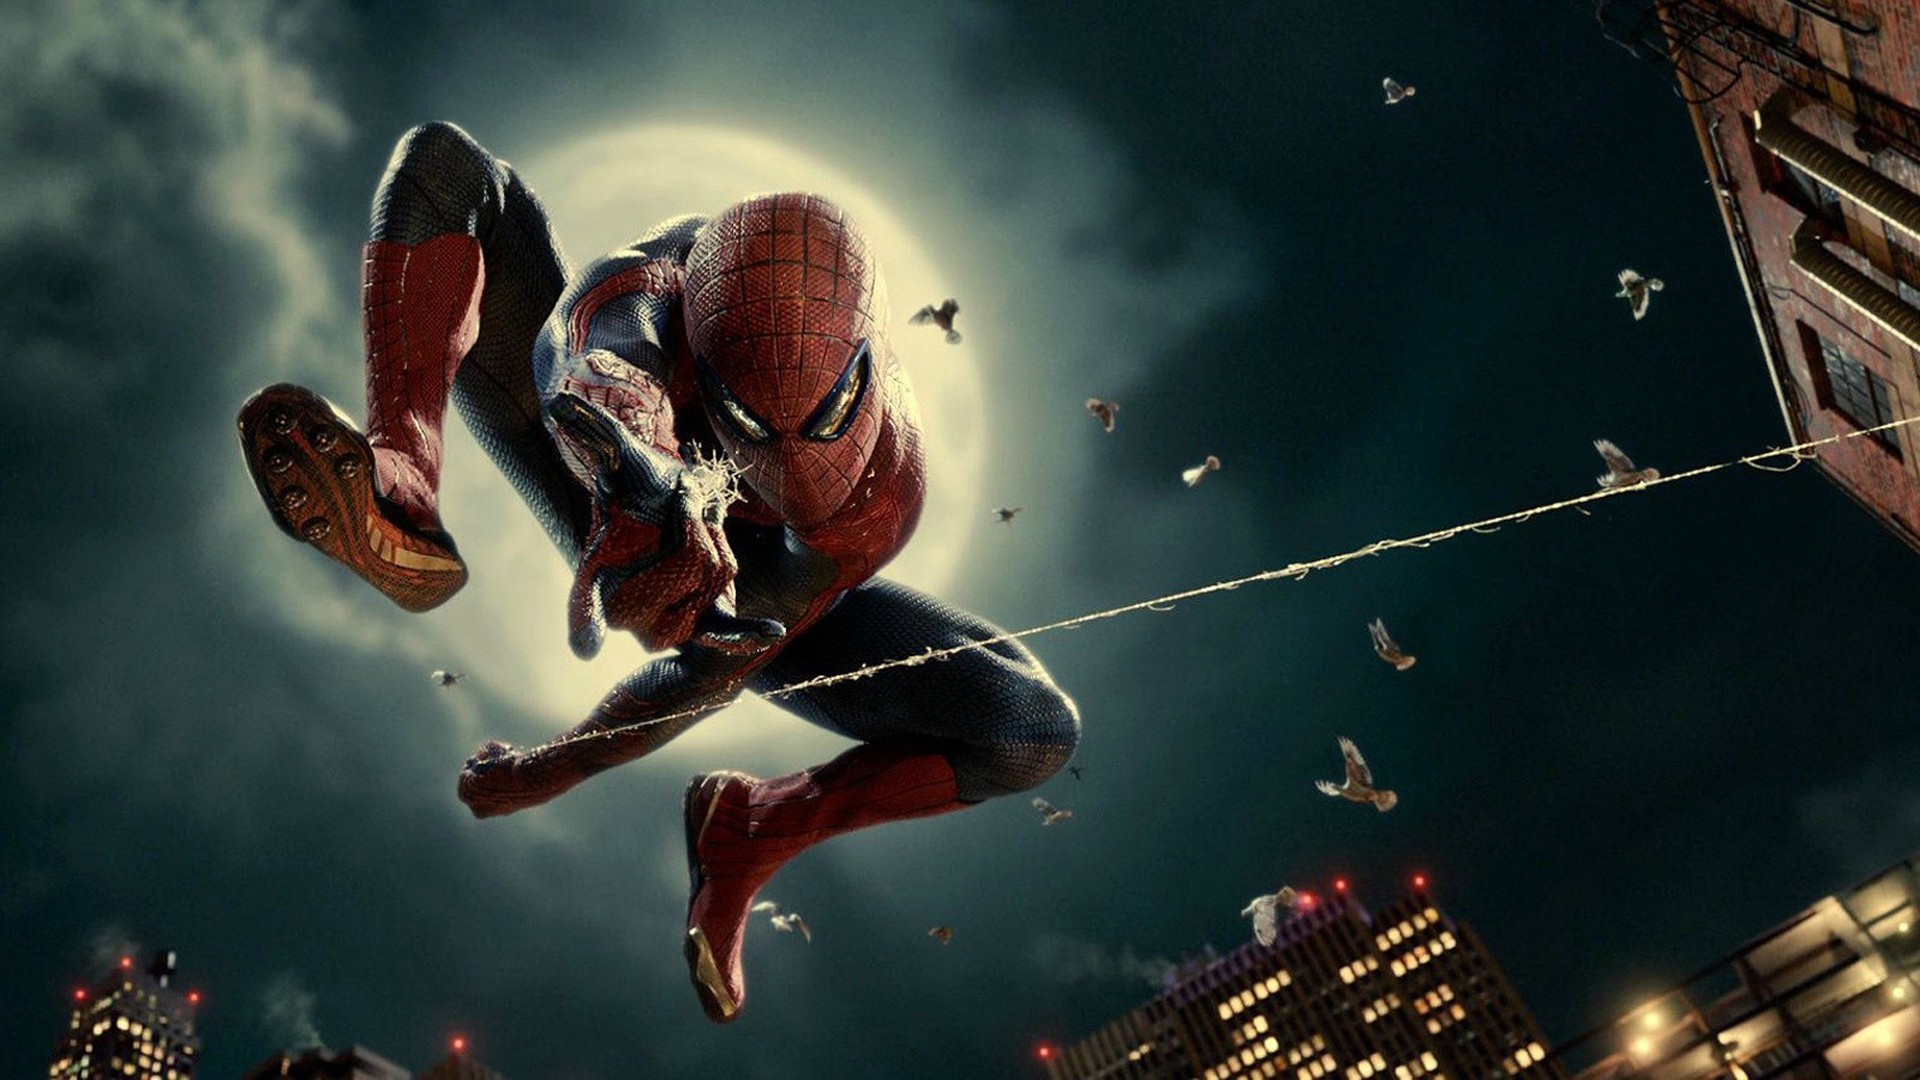 1920x1080 77 The Amazing Spider-Man HD Wallpapers | Backgrounds - Wallpaper